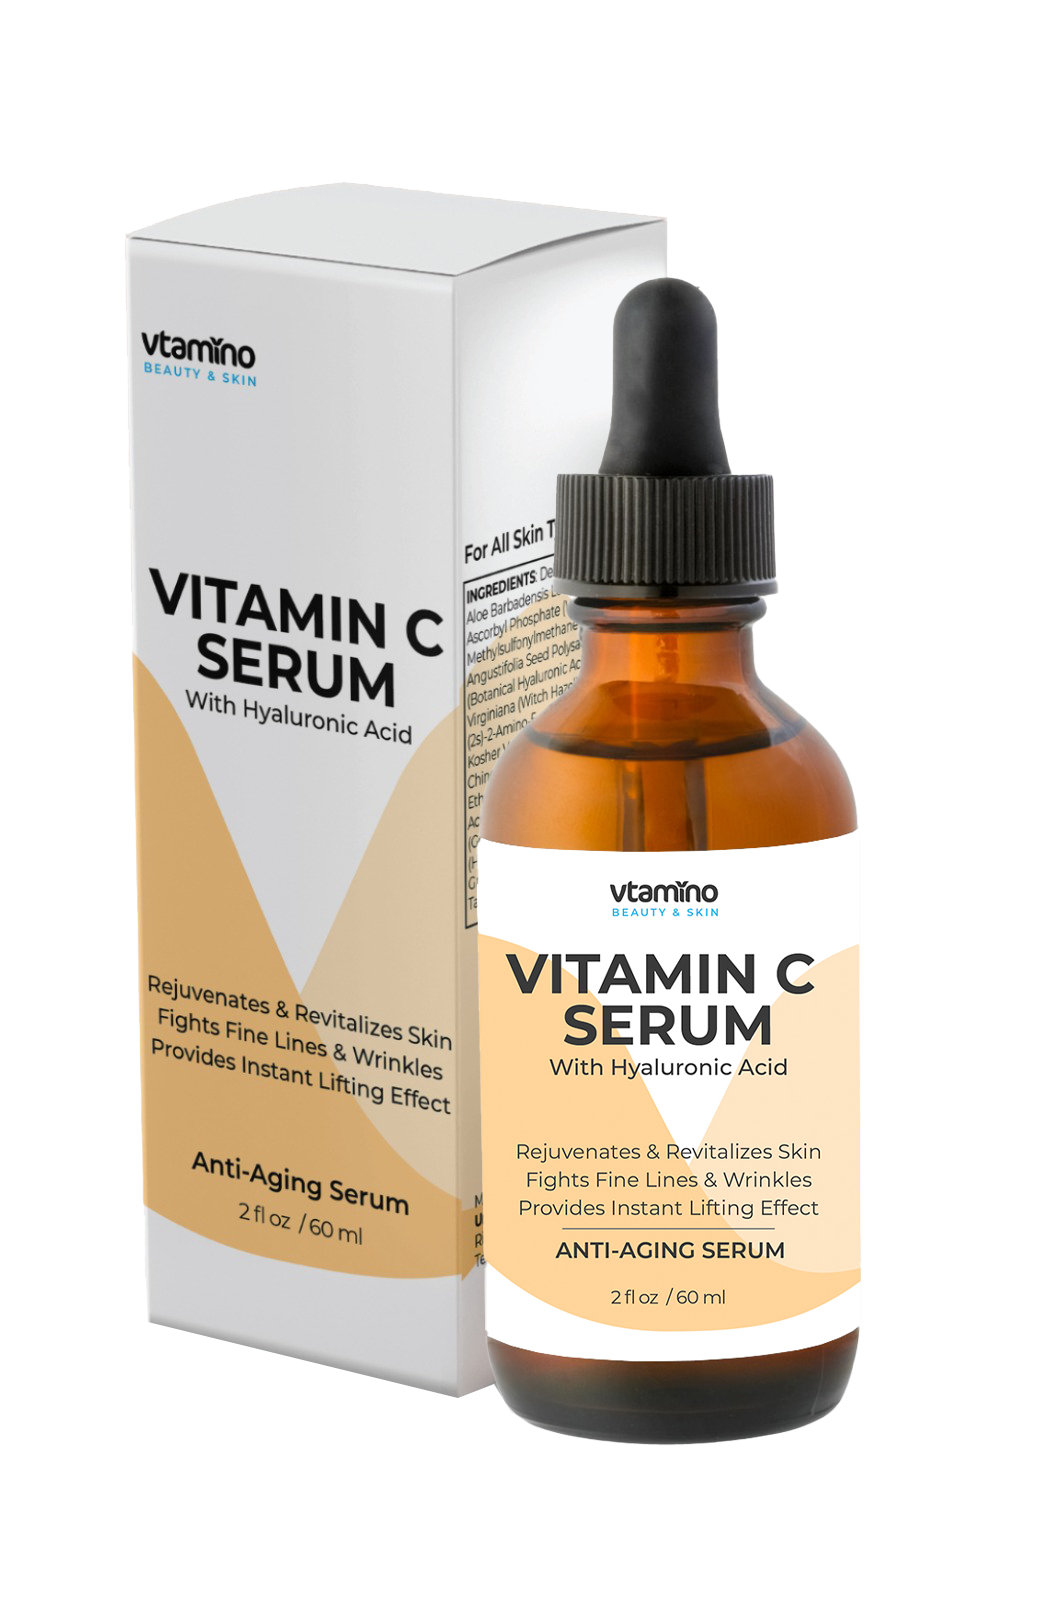 LIMITED TIME OFFER! vtamino Vitamin C Serum & Hyaluronic Acid (60ml) + FREE Themaqueen Cooling Stick Face & Eye-Intensive Skin Cooler-The Ultimate Solution for Anti-Aging